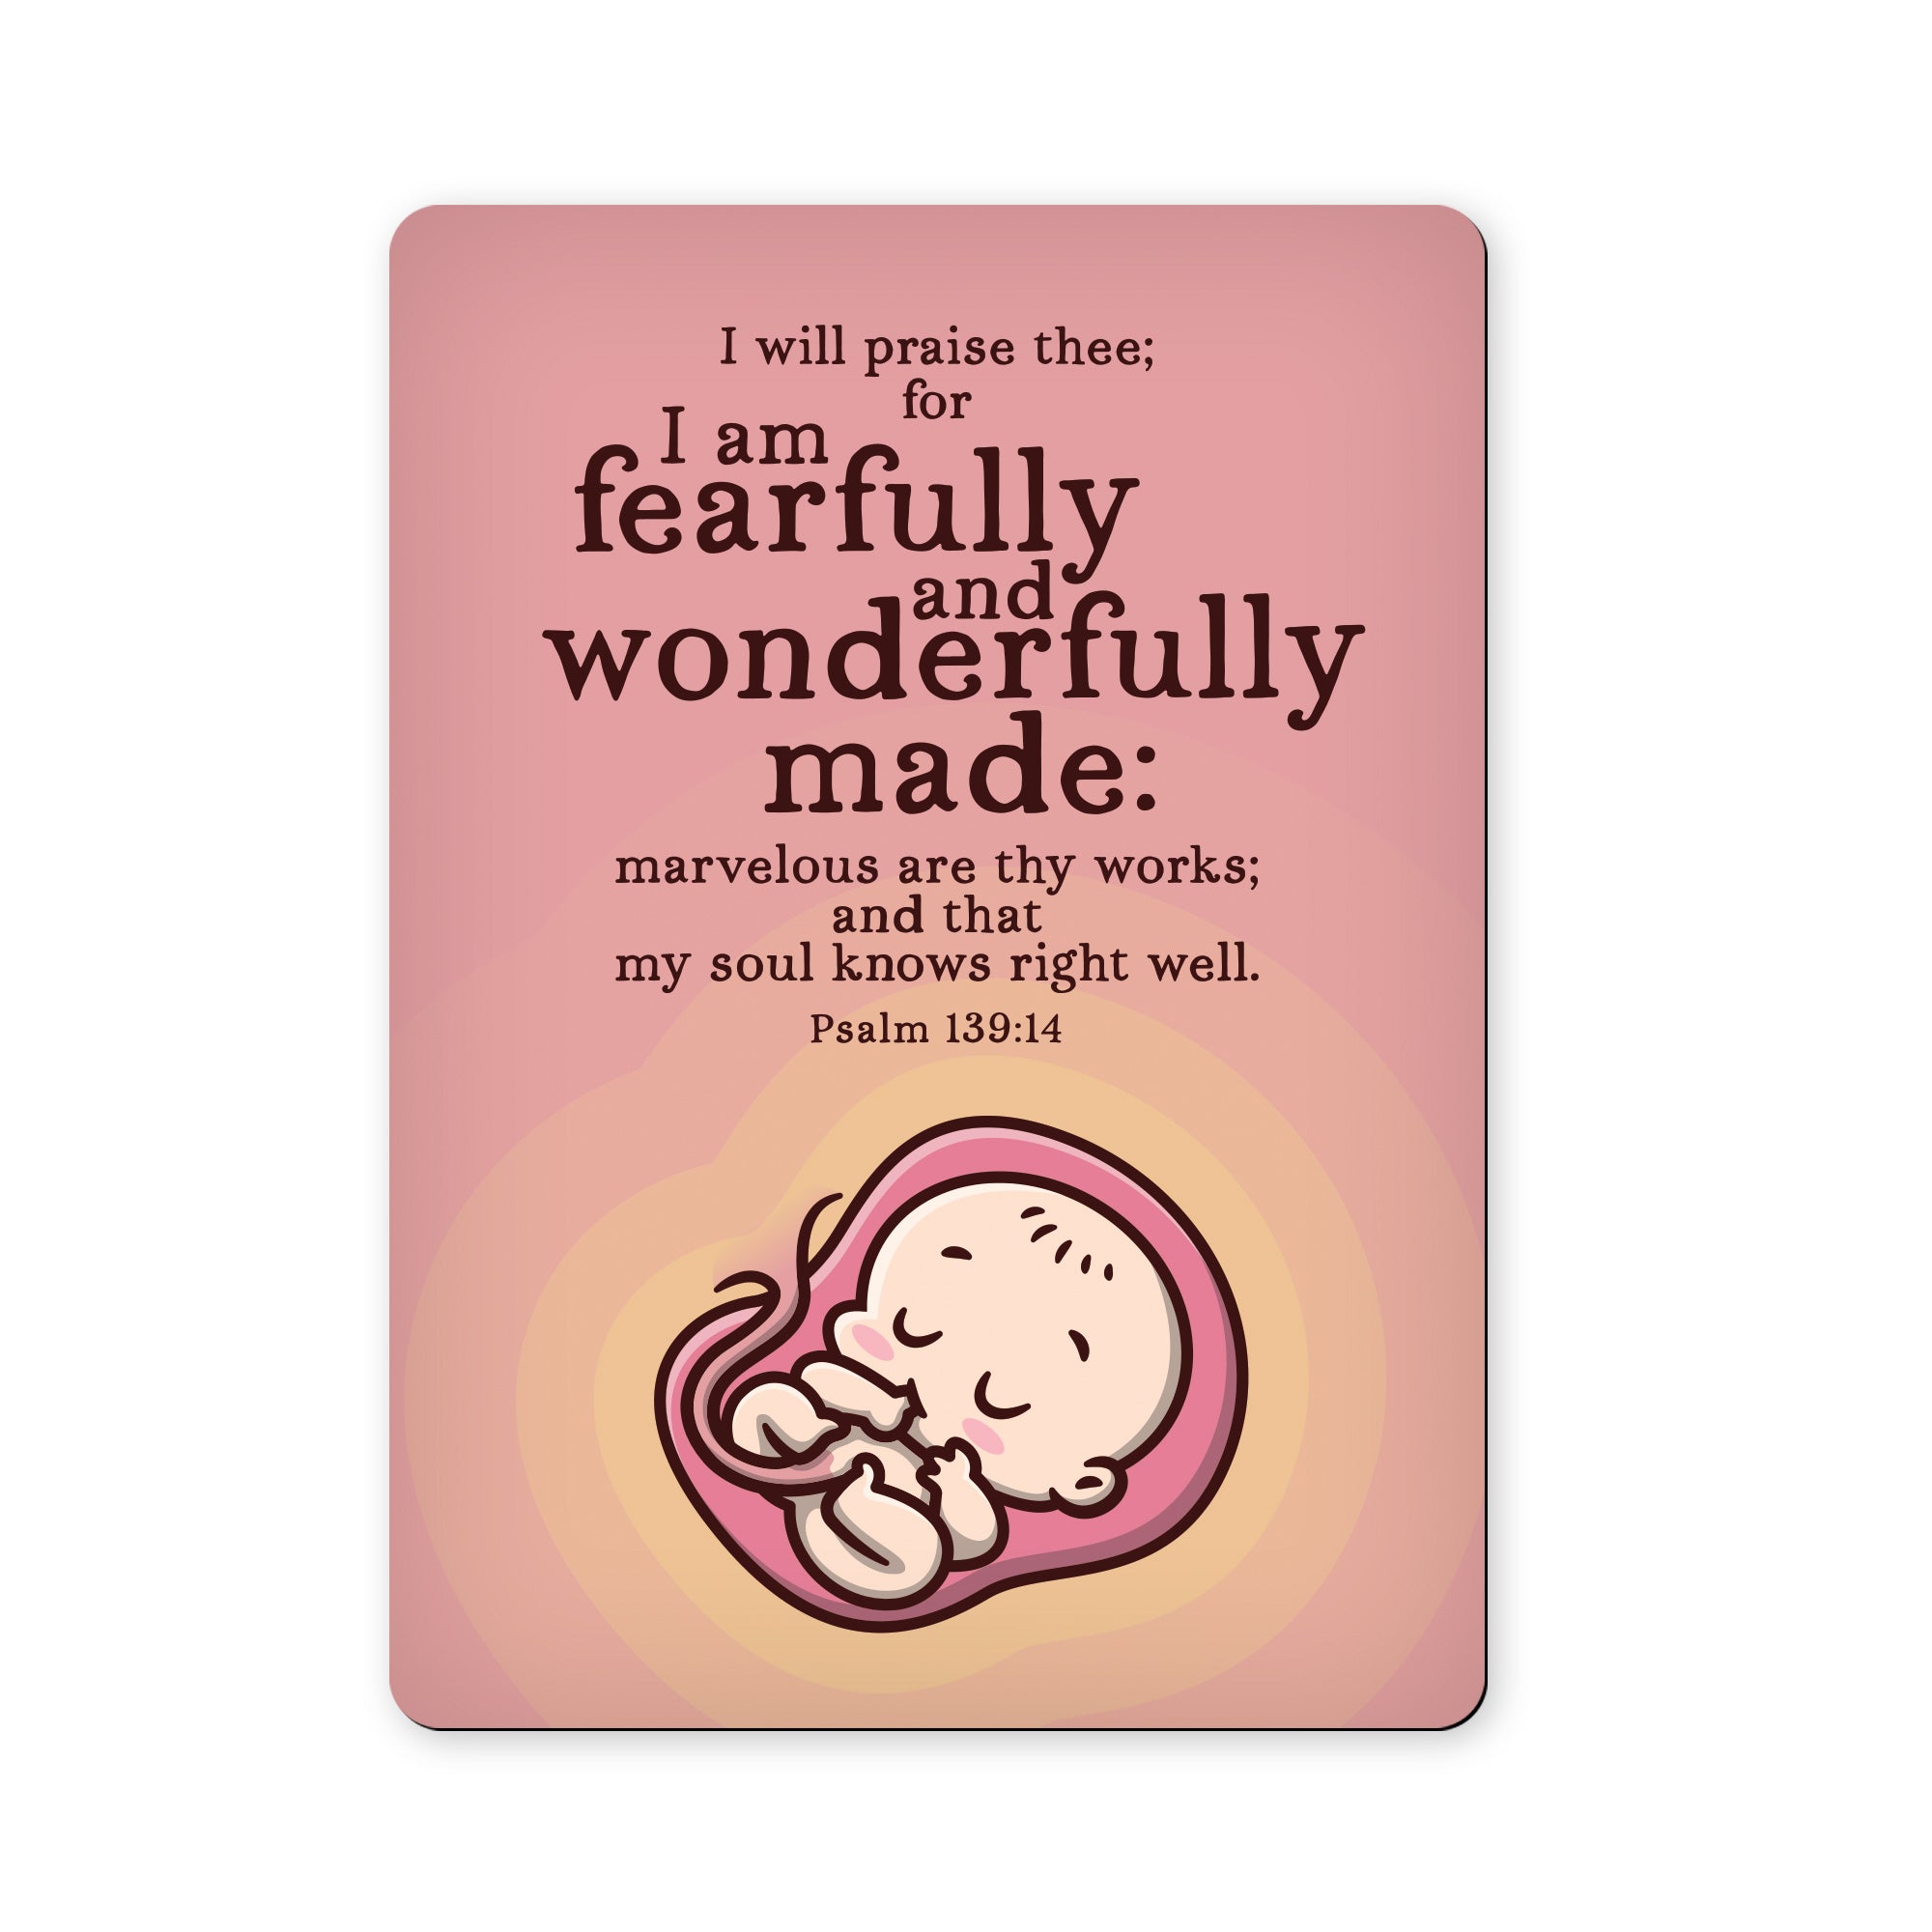 I am fearfully and wonderfully made - Psalm 139:14 - Scripture Magnet